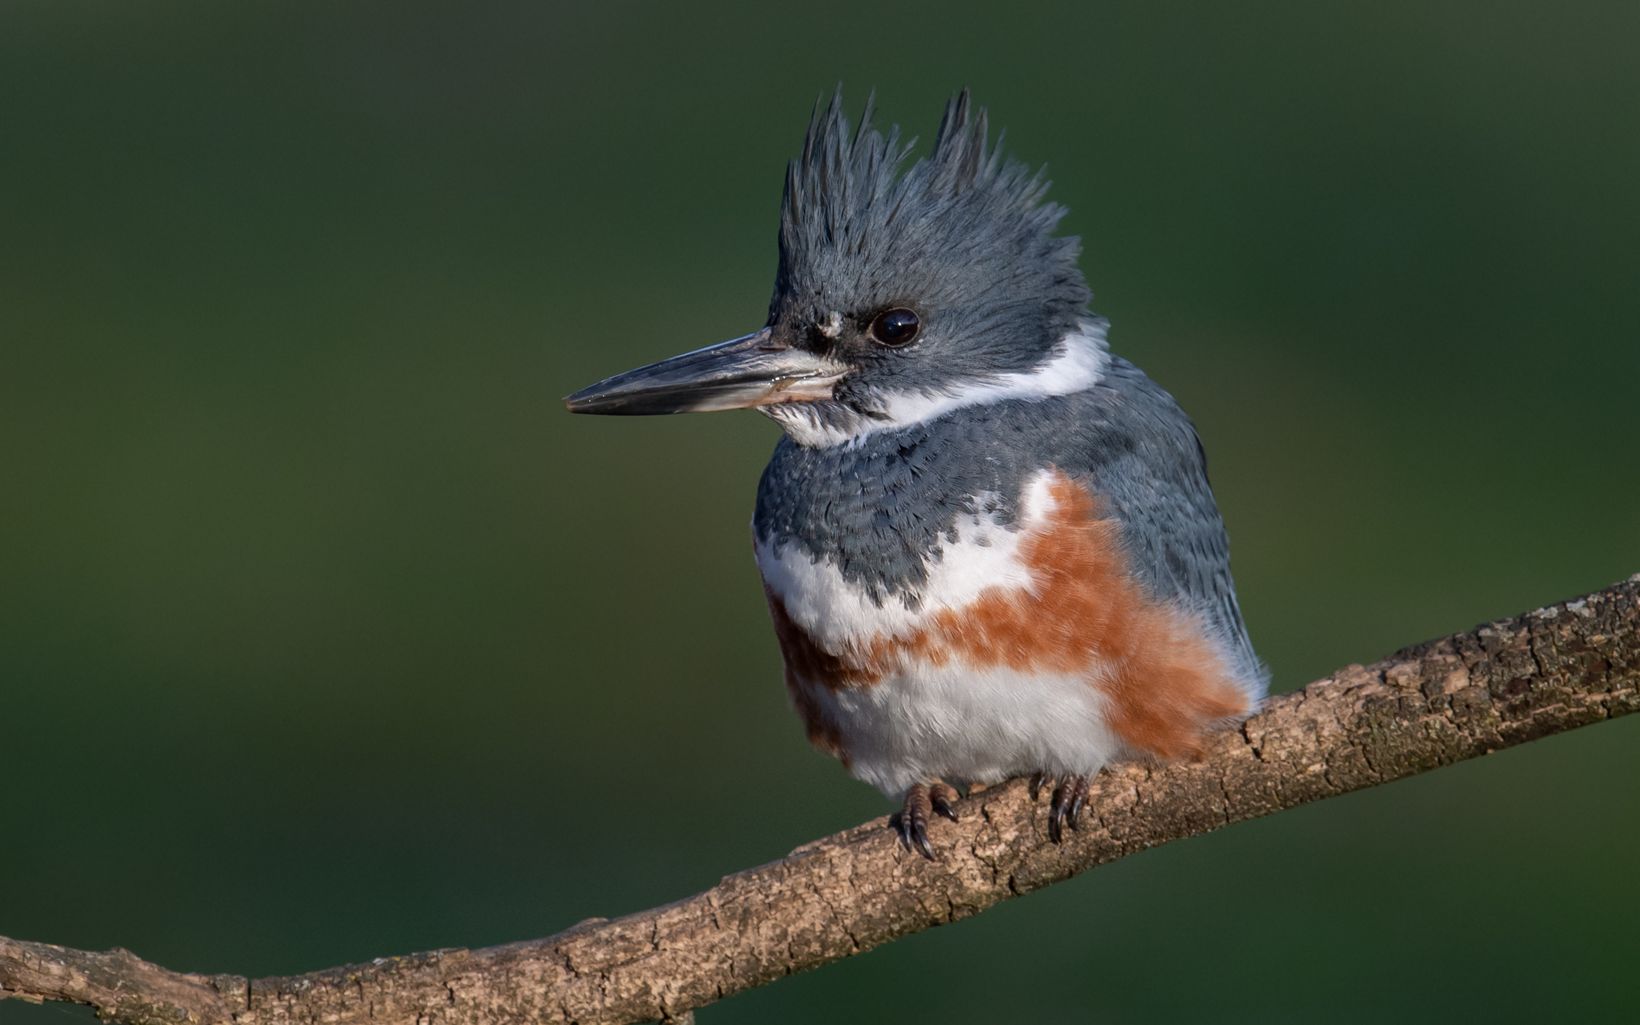 Belted Kingfisher Belted kingfishers can be seen perched along the Maurice River.  © Shutterstock